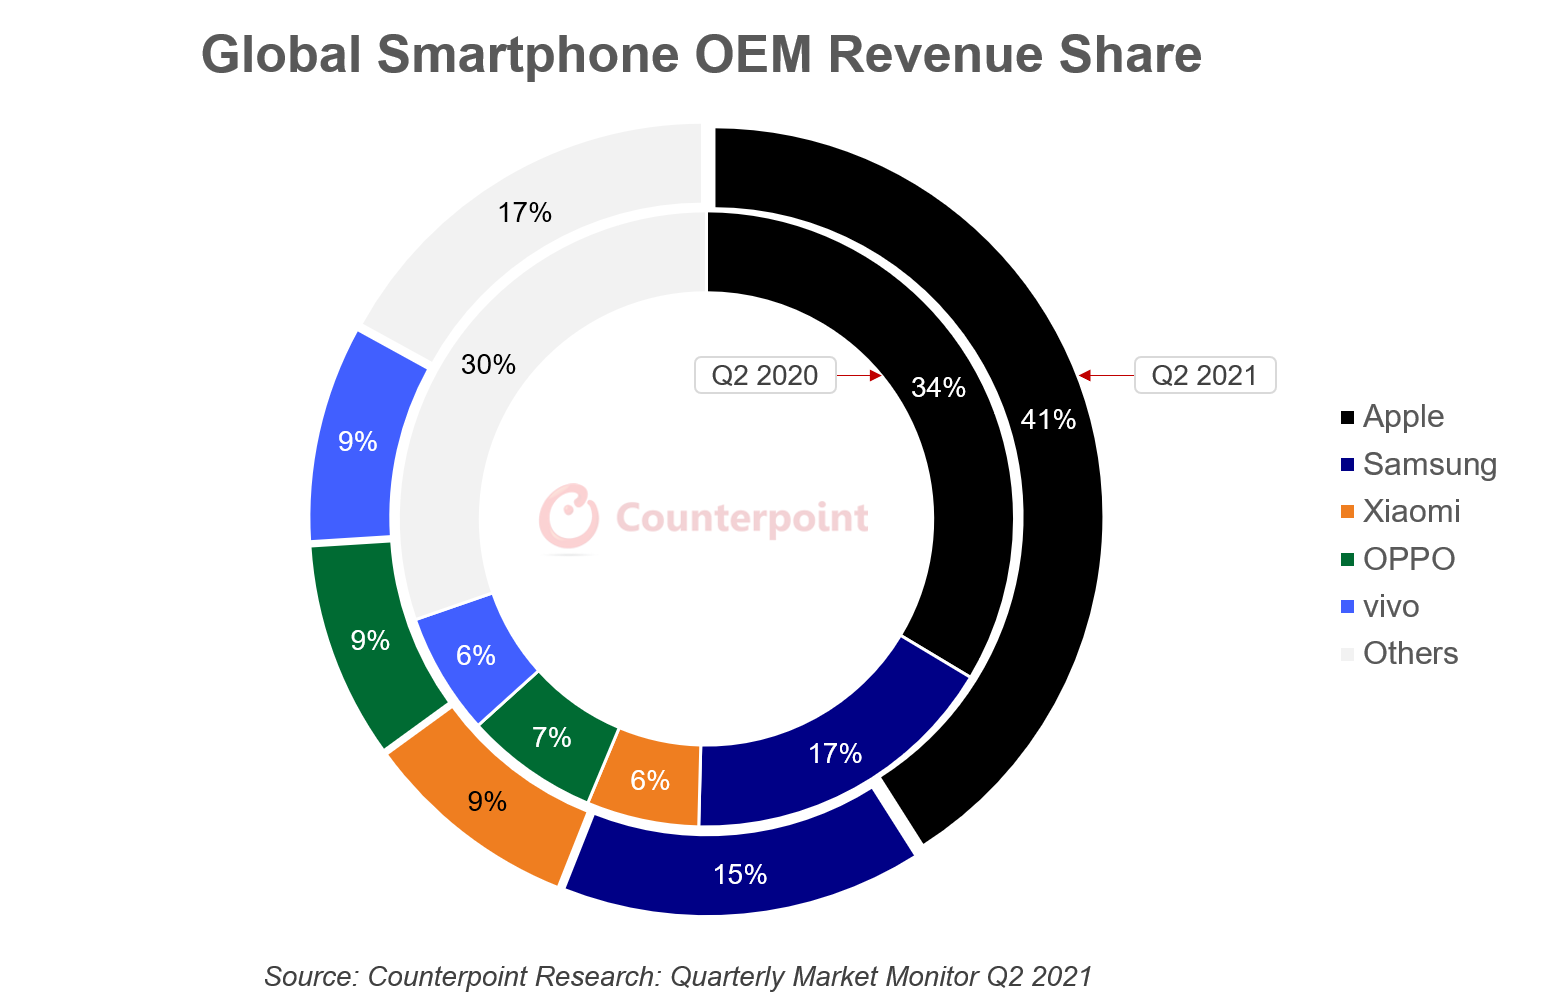 The iPhone accounted for a record 41% of smartphone revenue last quarter